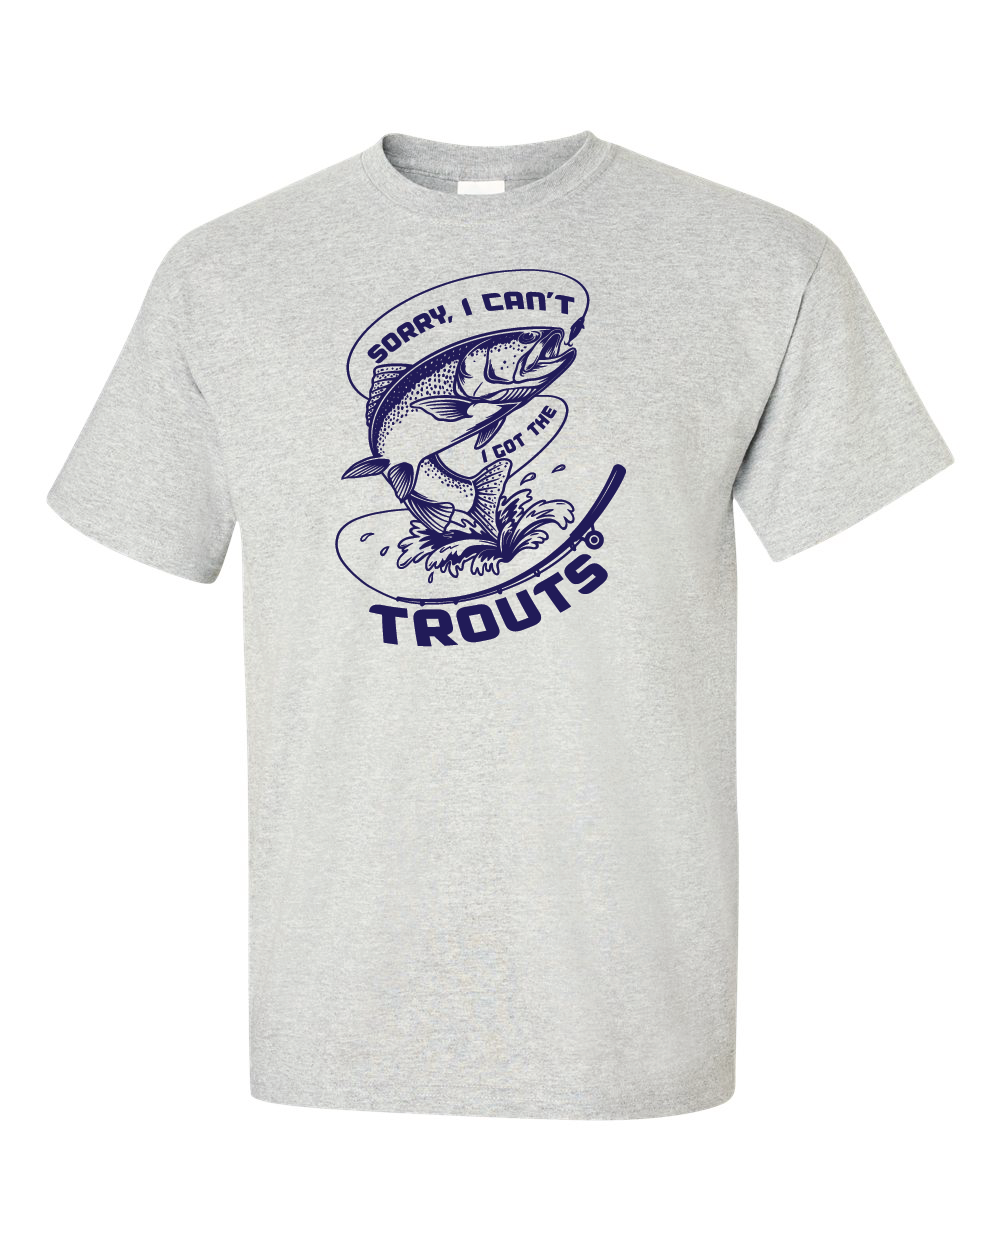 The Trouts Tee